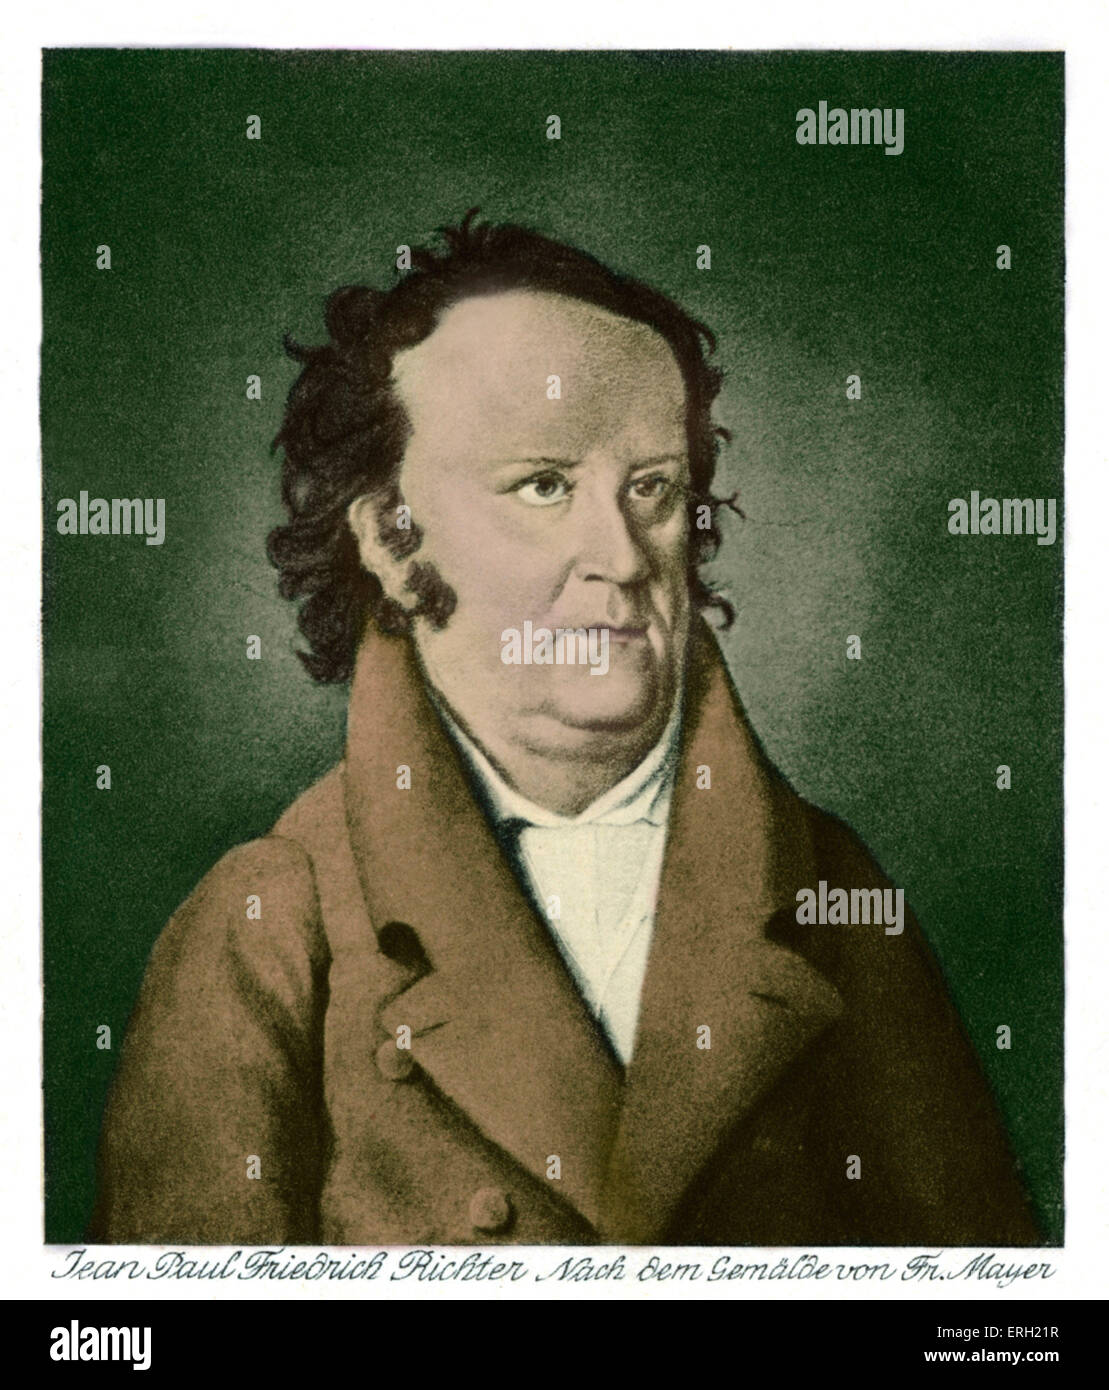 Jean Paul (or Johann Paul) Friedrich Richter, German poet whose works inspired Mahler, Schumann & other composers (1763-1825). Stock Photo